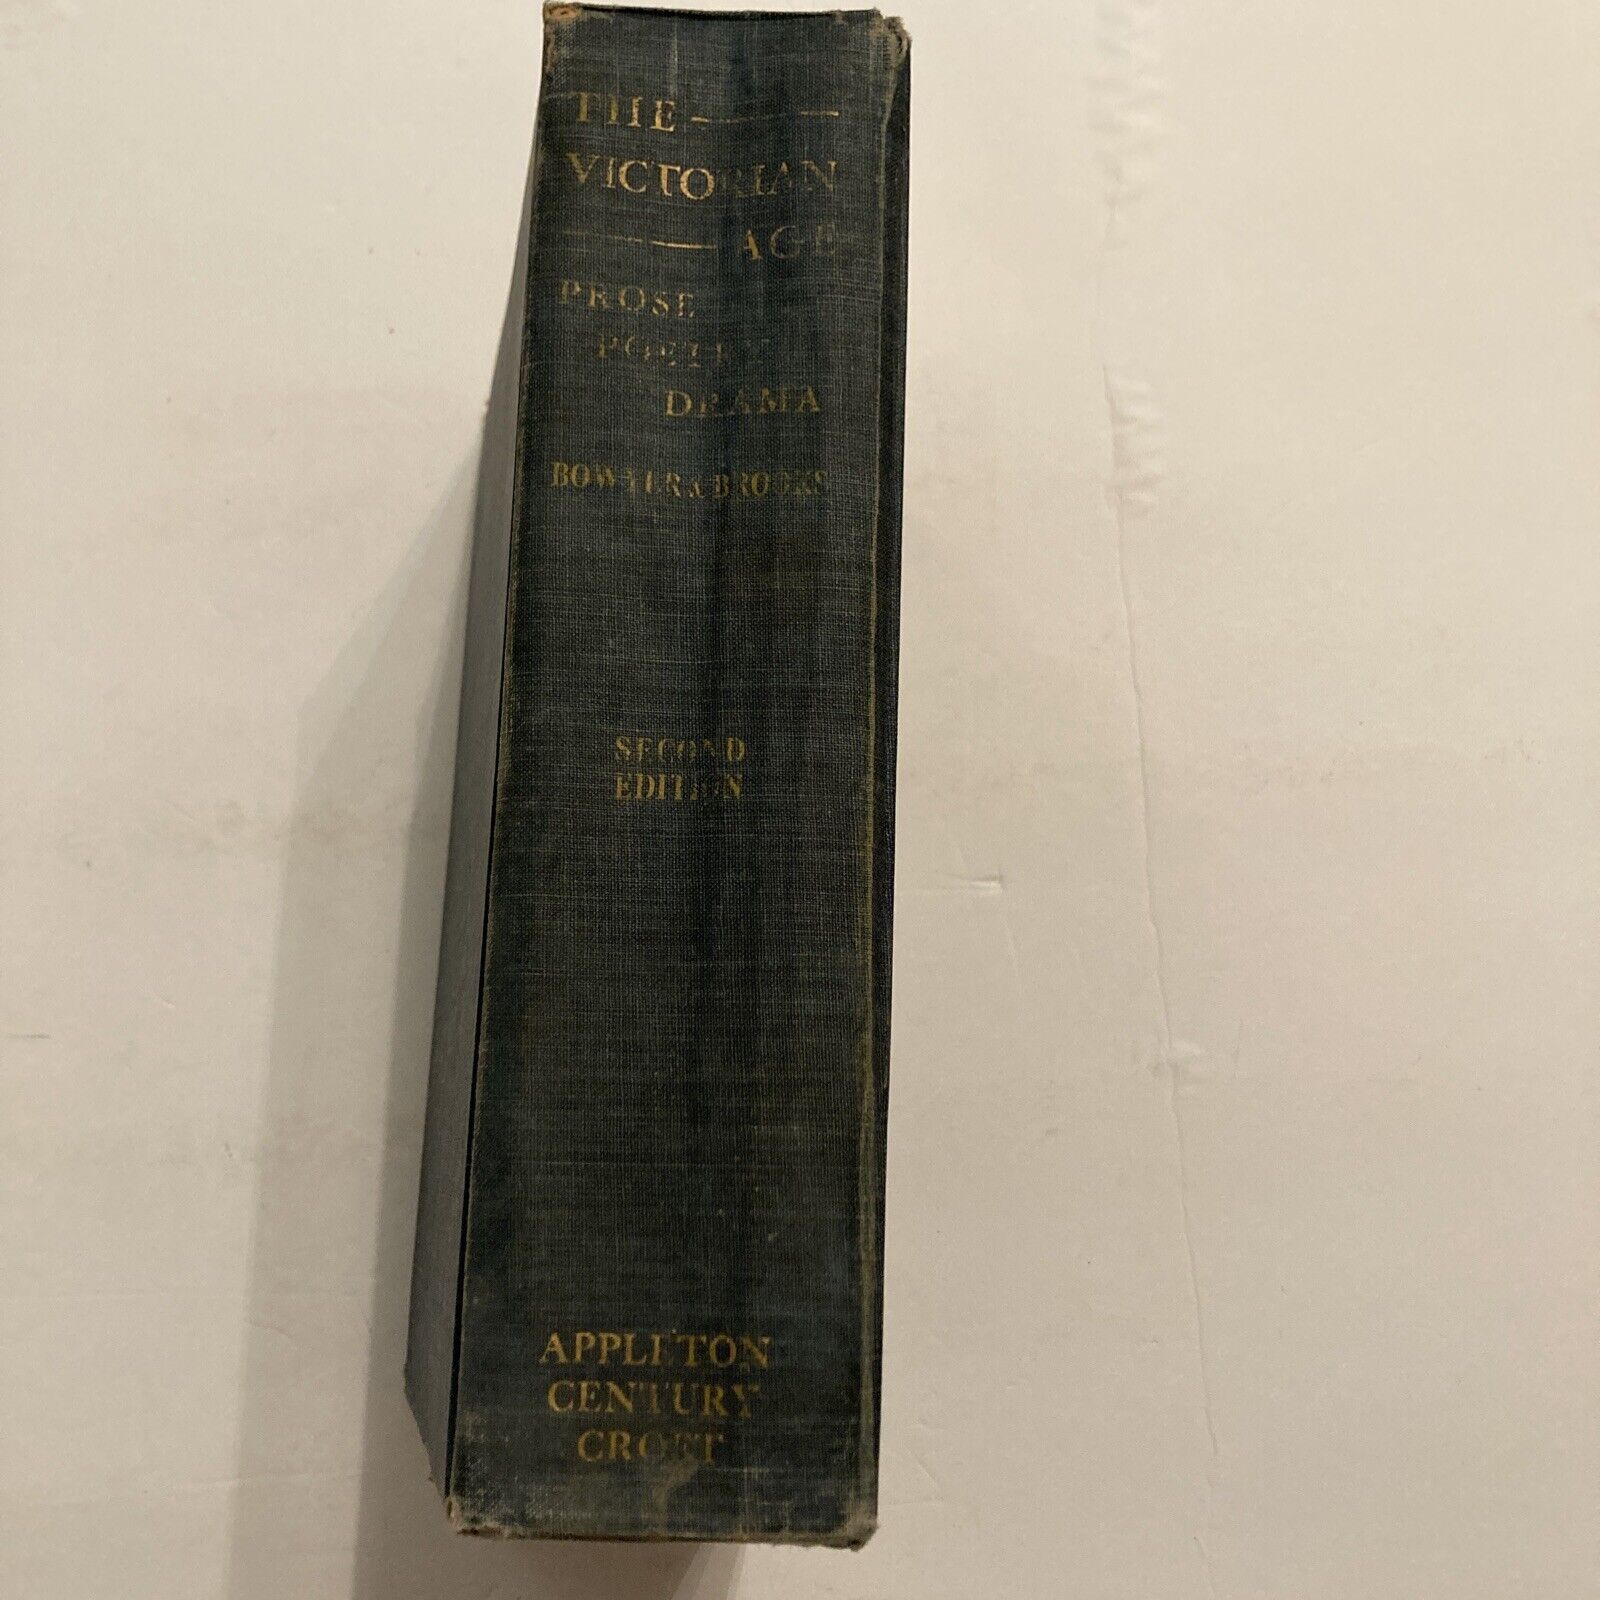 Victorian Age Prose Poetry and Drama 2nd Edition John W Bowyer John Brooks 1954